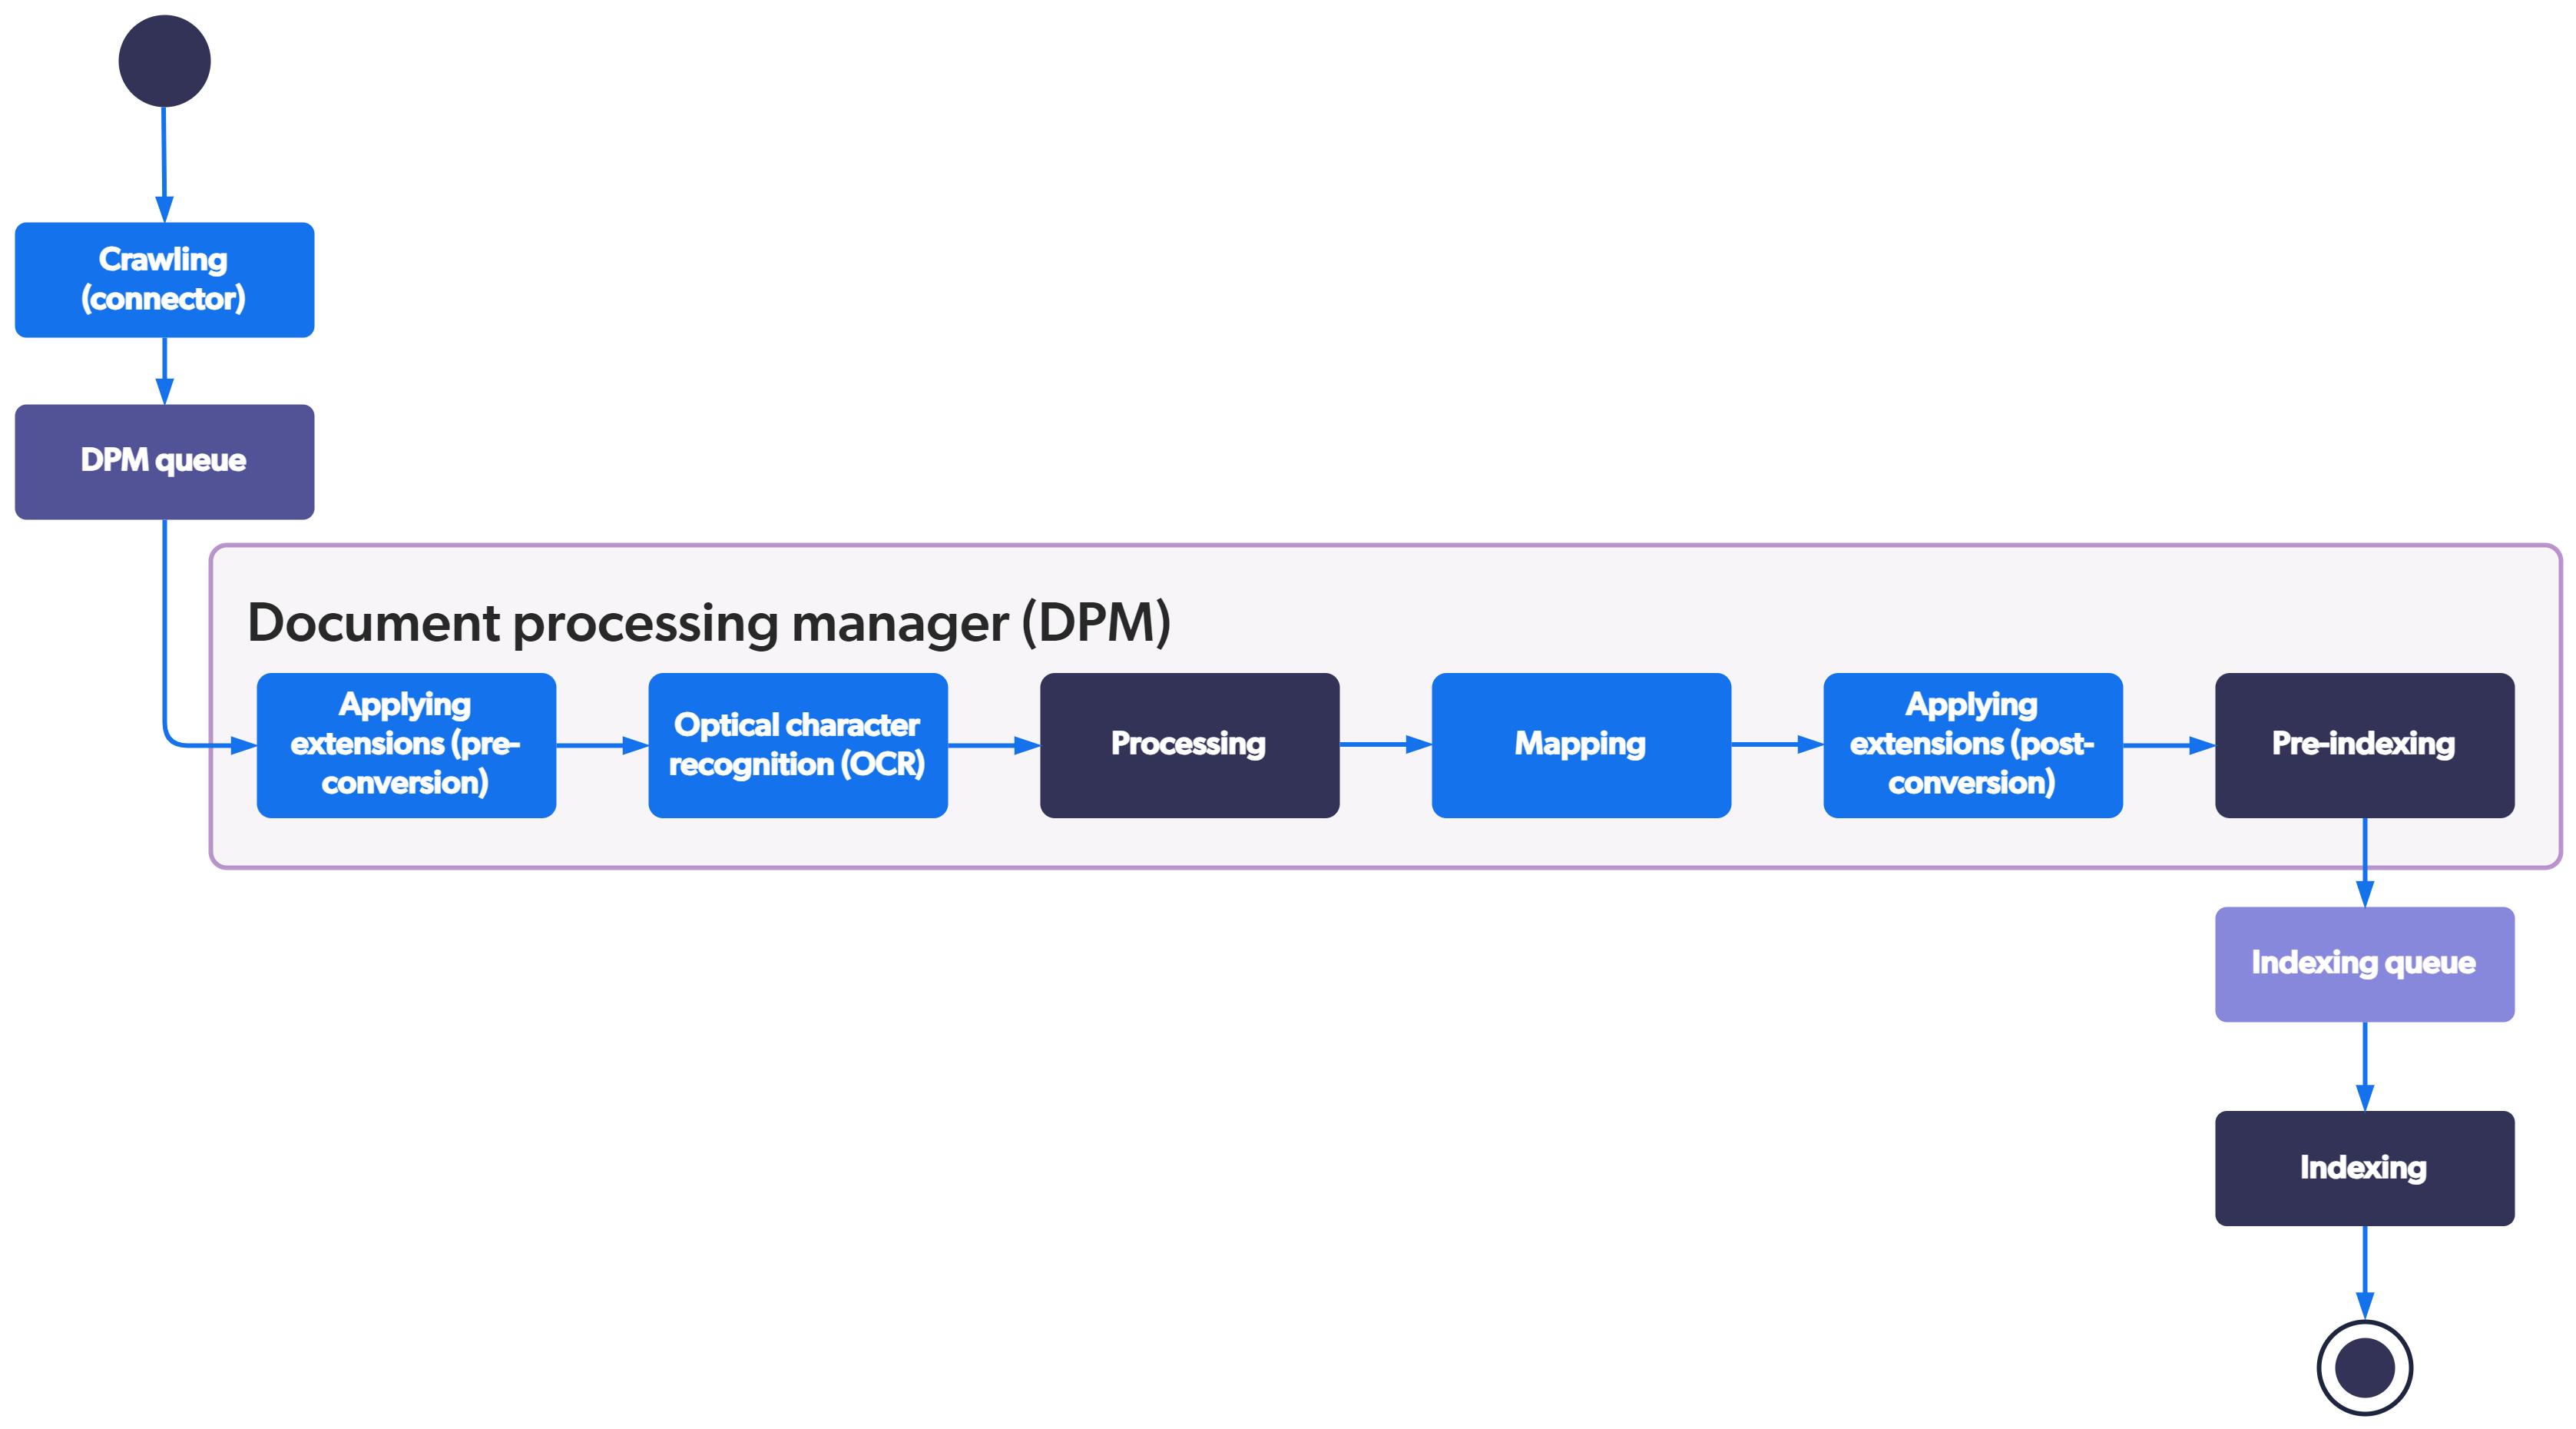 The Coveo indexing pipeline